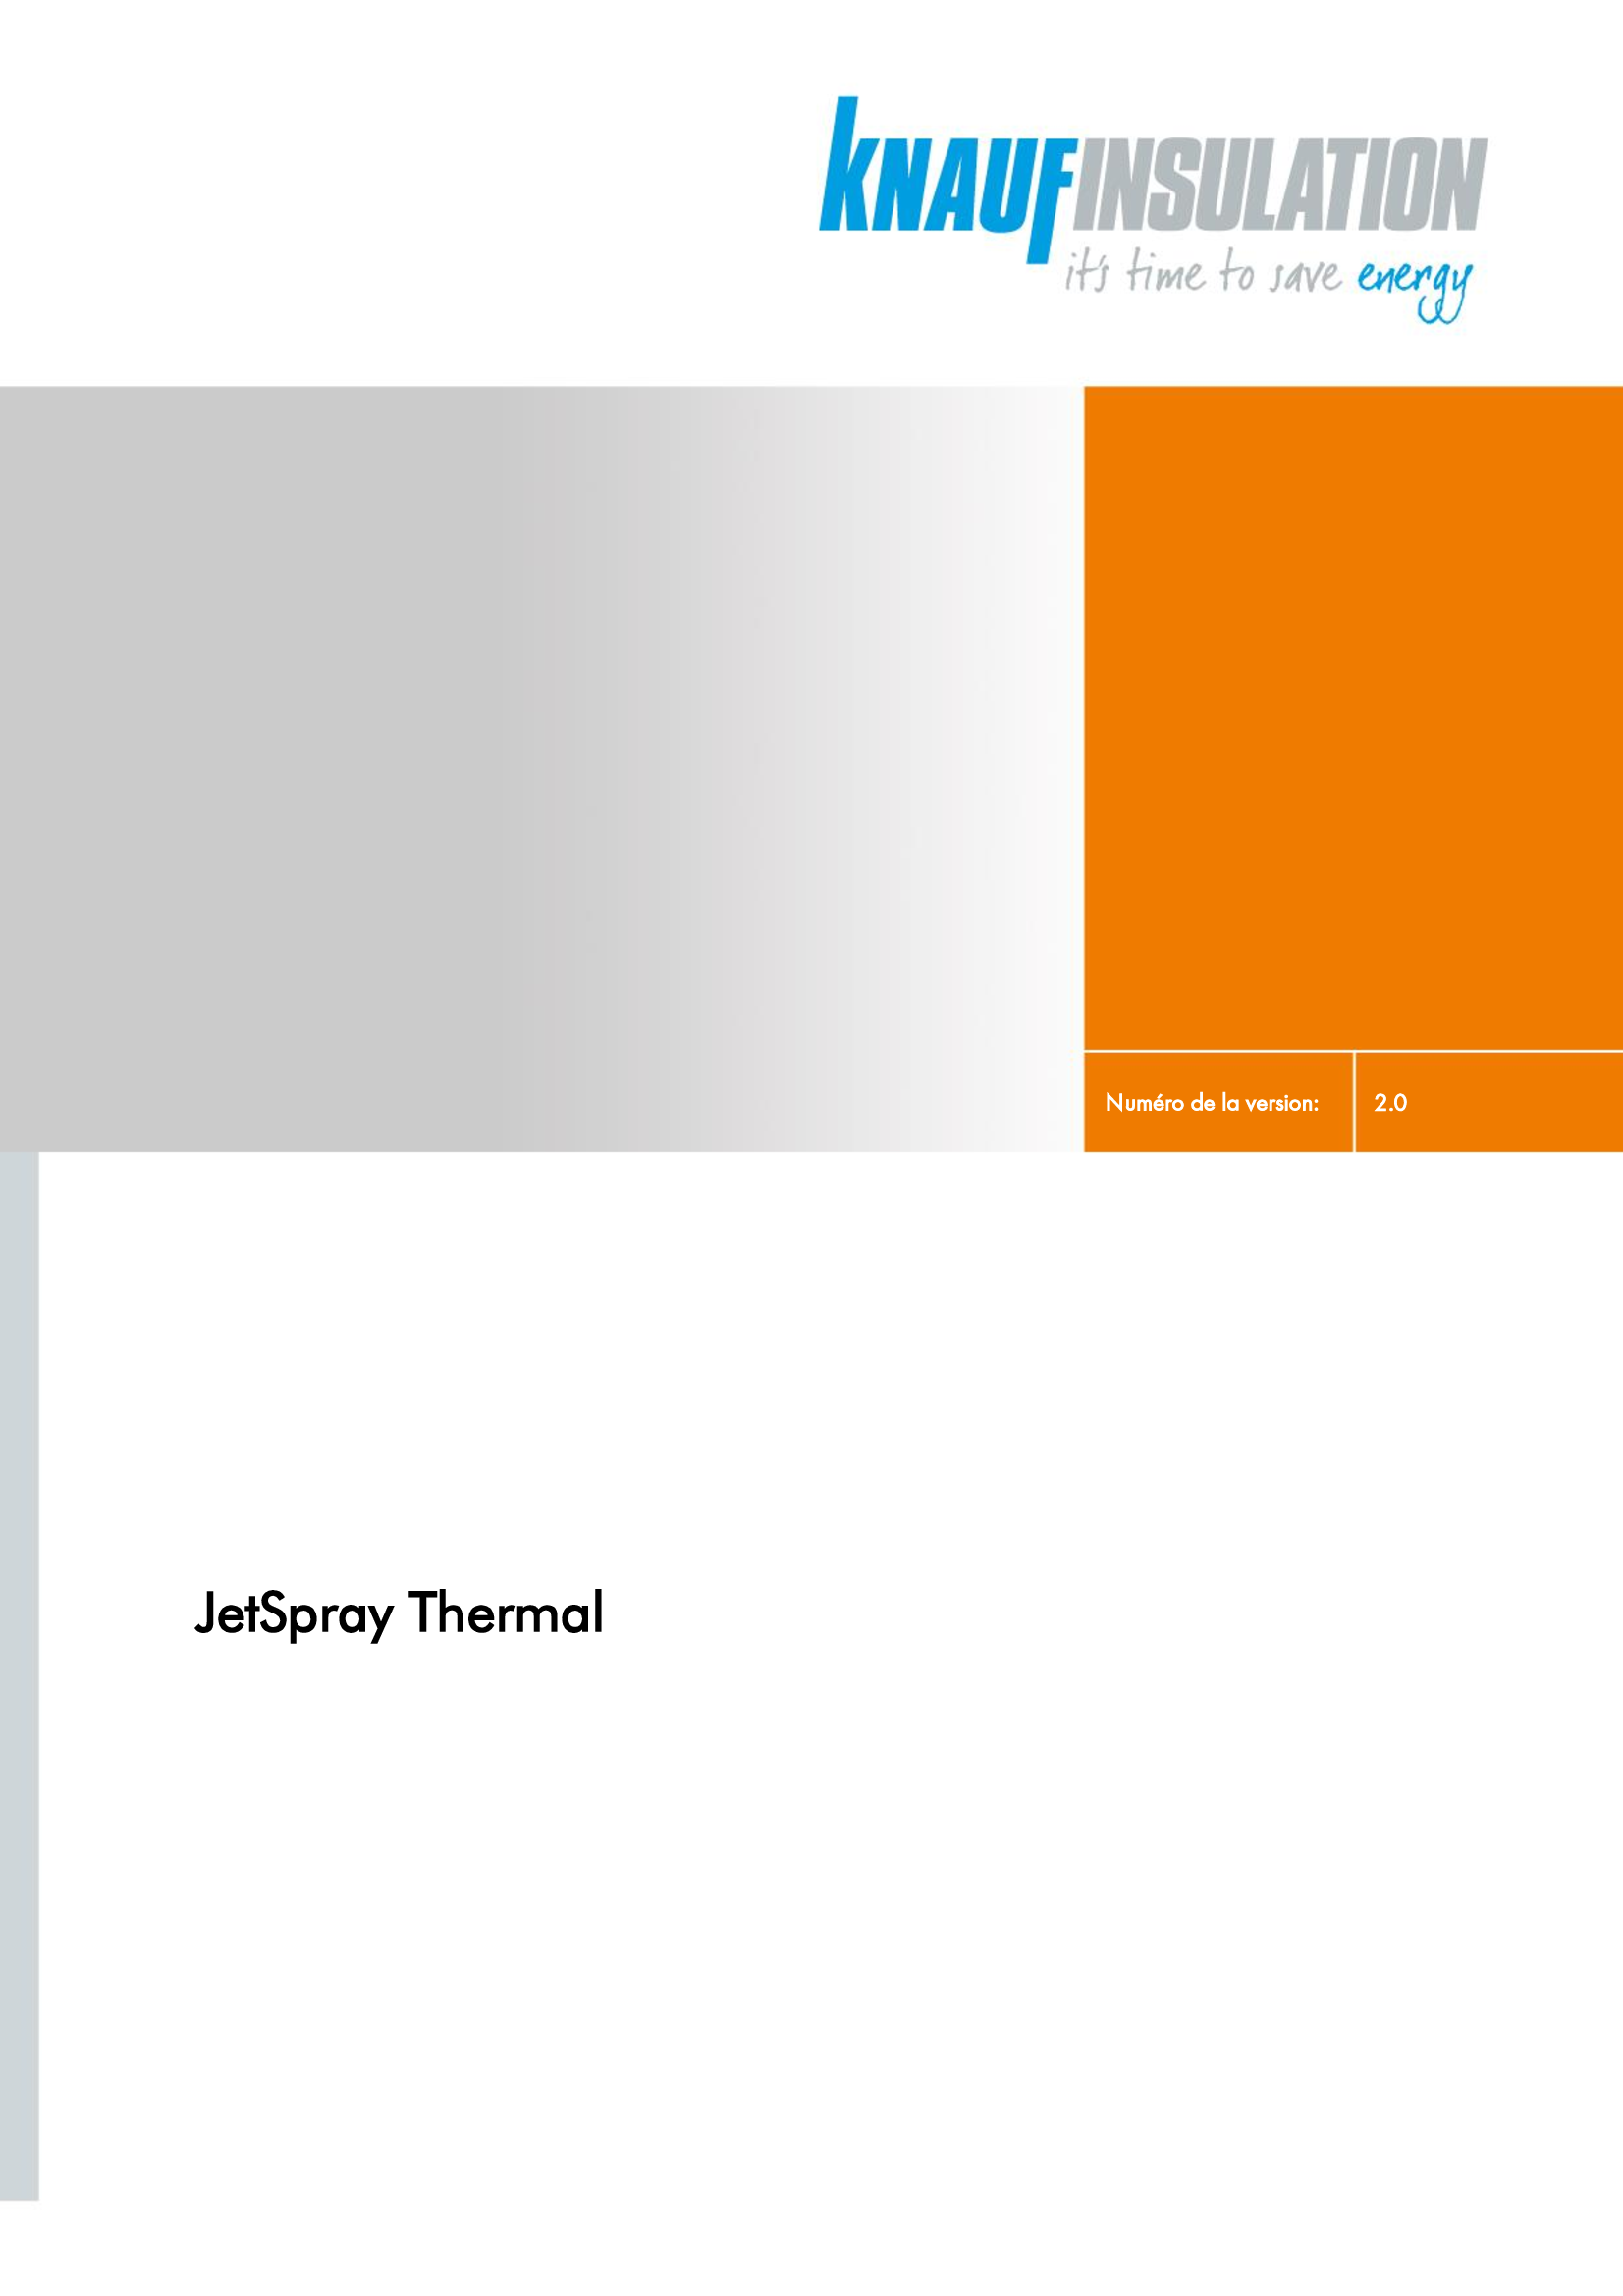 FDS - Jetspray Thermal